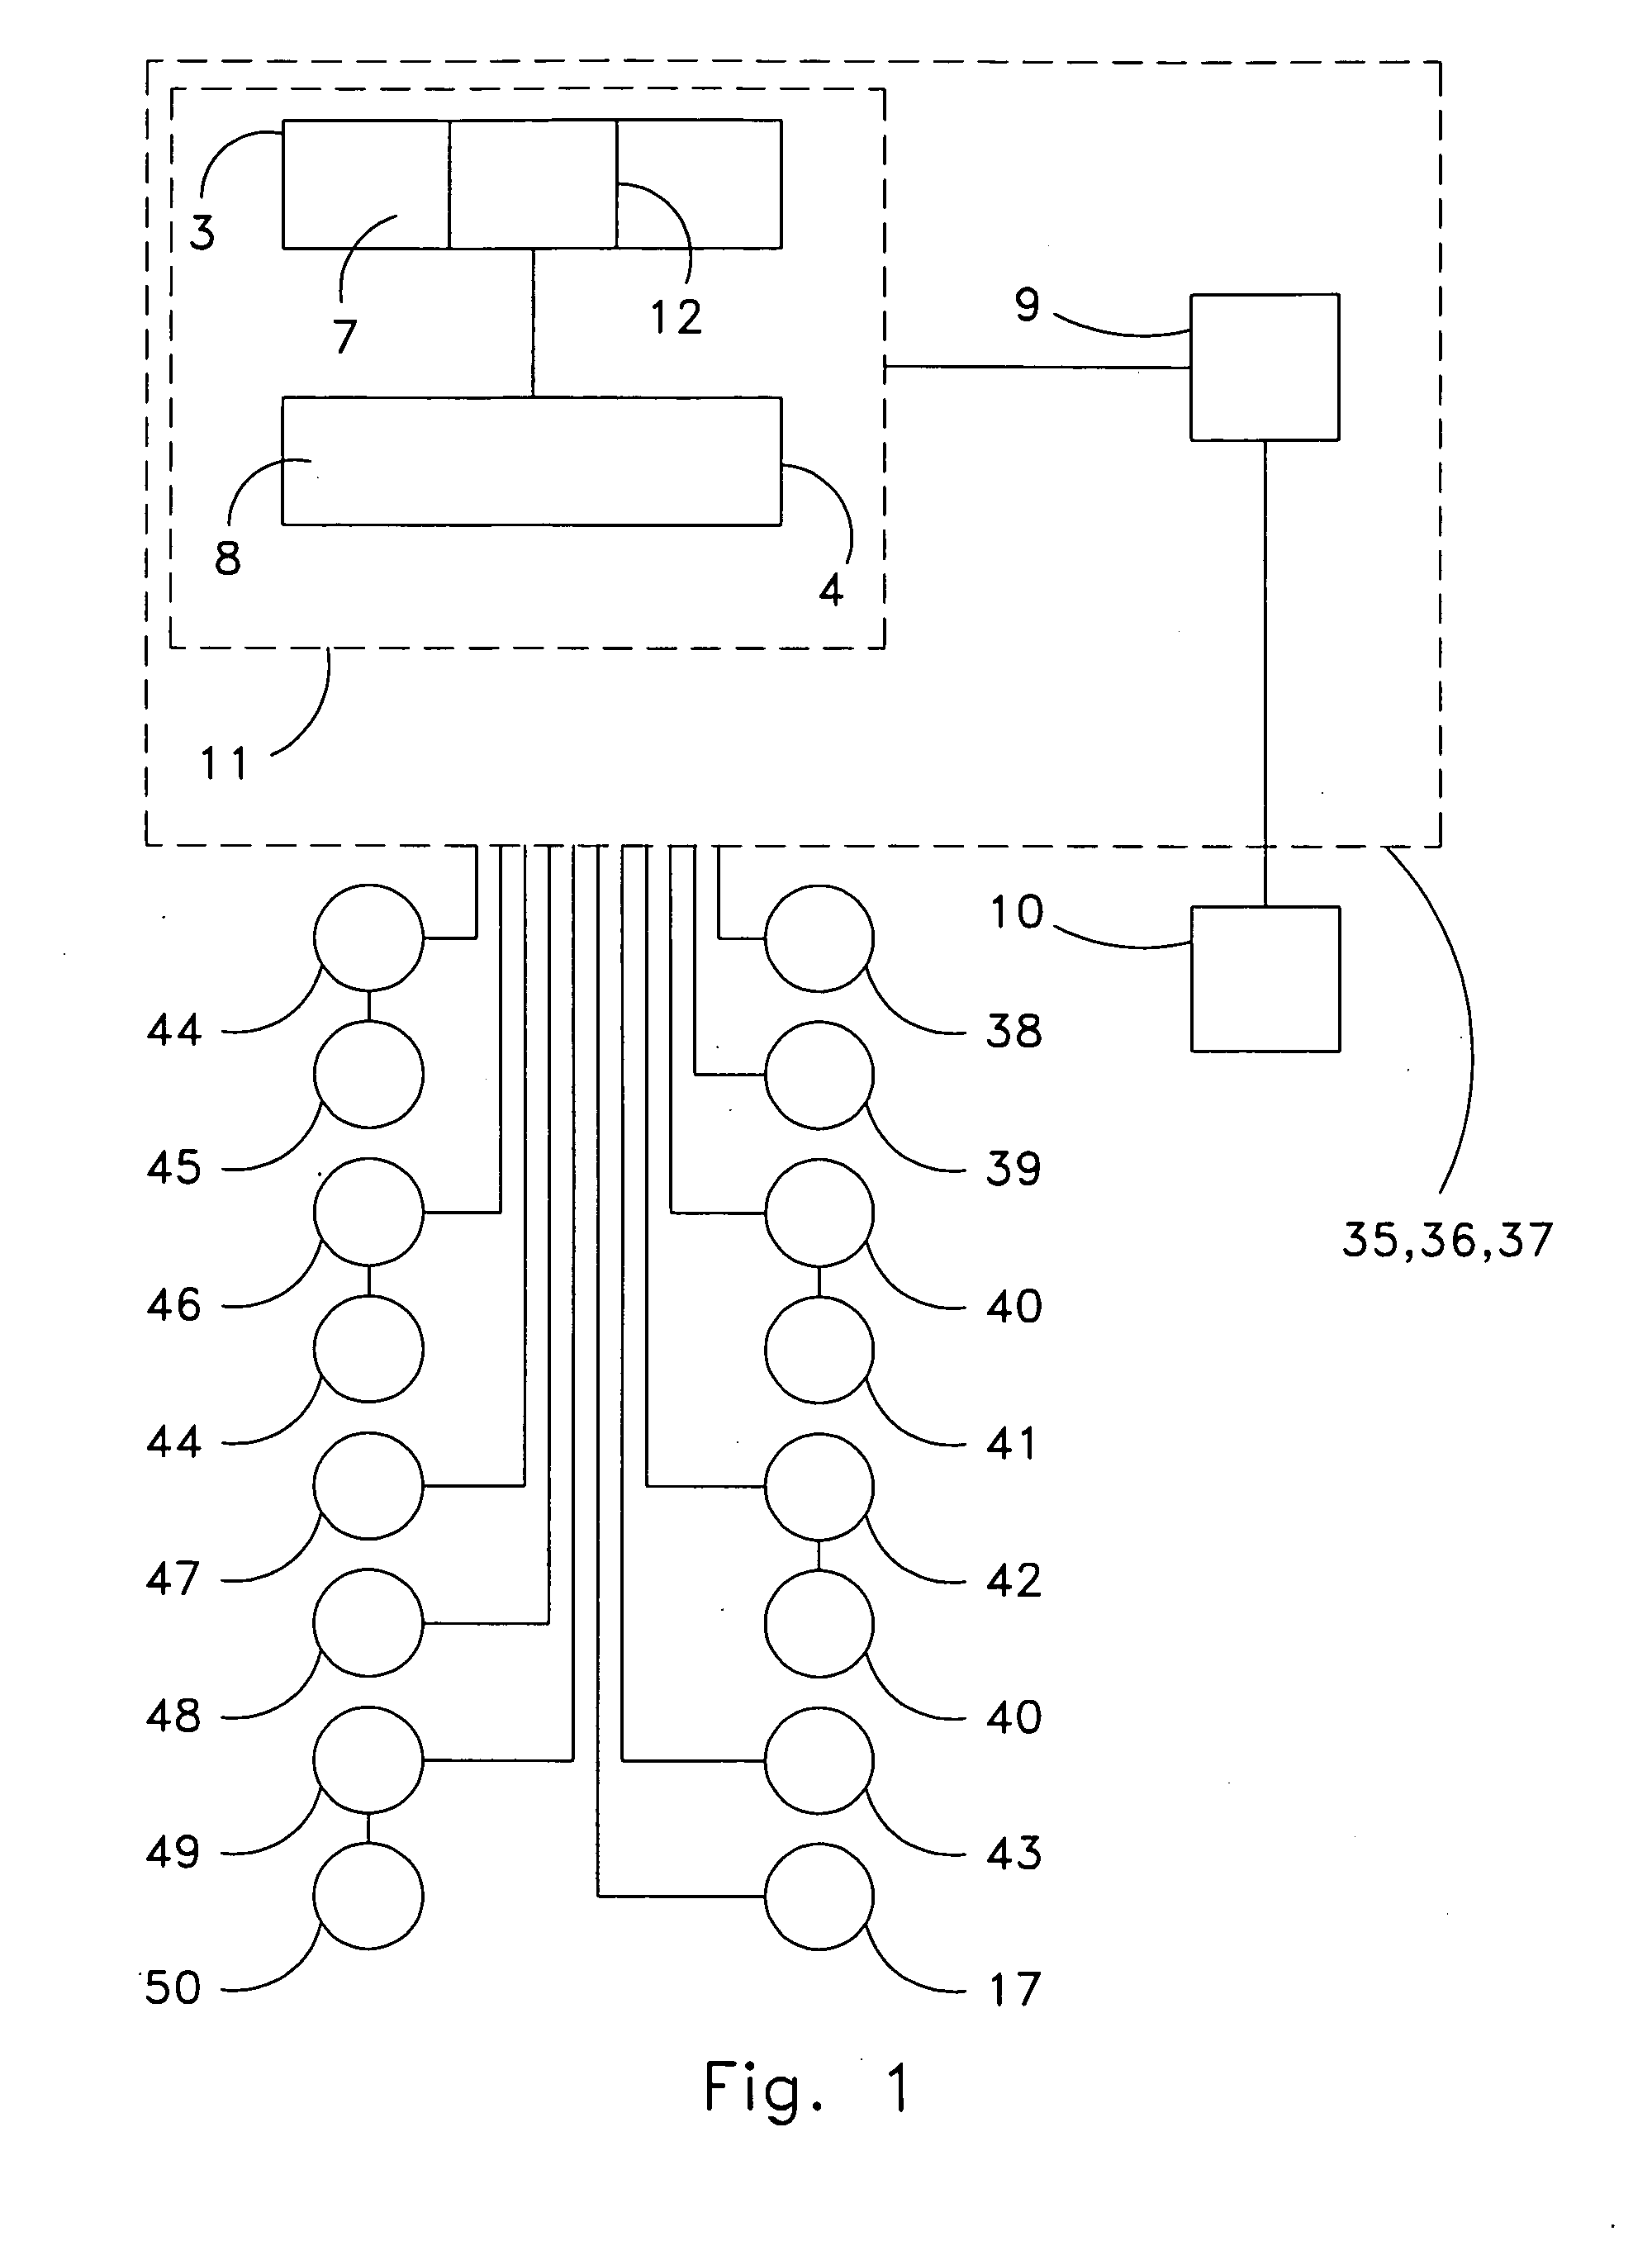 Methods and Apparatus for the Manipulation of Conferenced Data